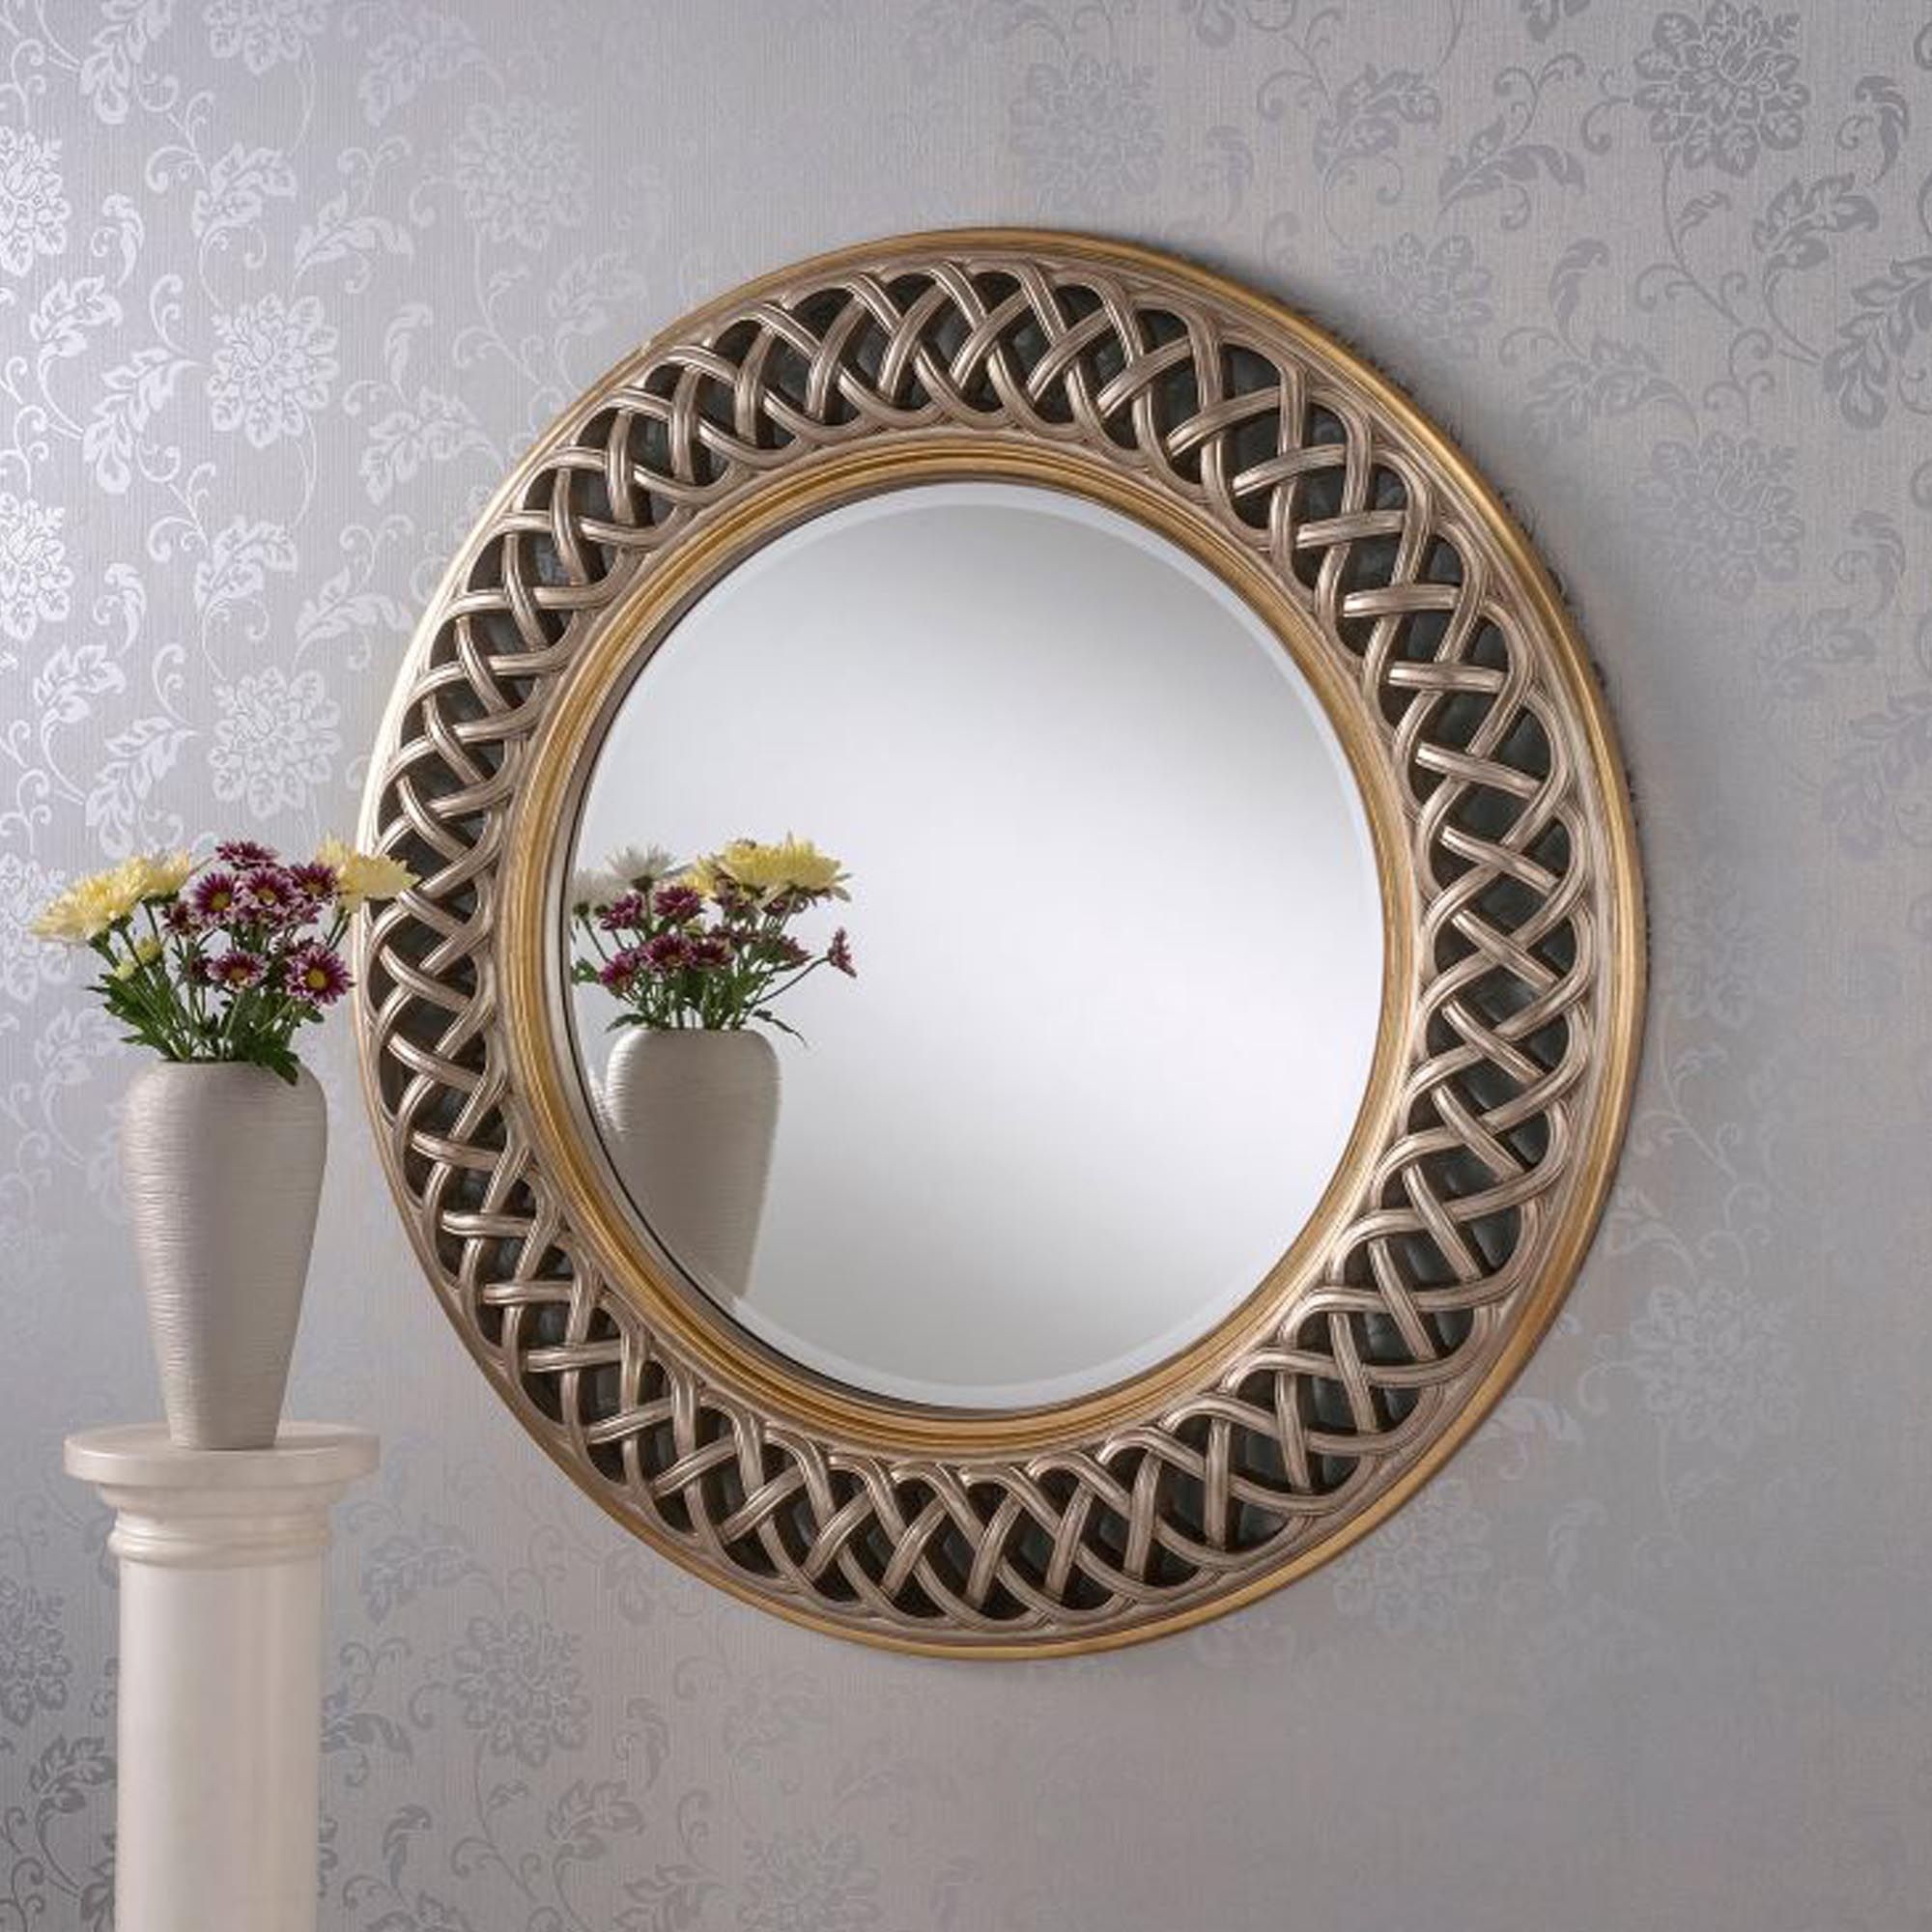 Interlocking Lace Silver/gold Decorative Wall Mirror | Homesdirect365 Throughout Accent Mirrors (View 14 of 15)